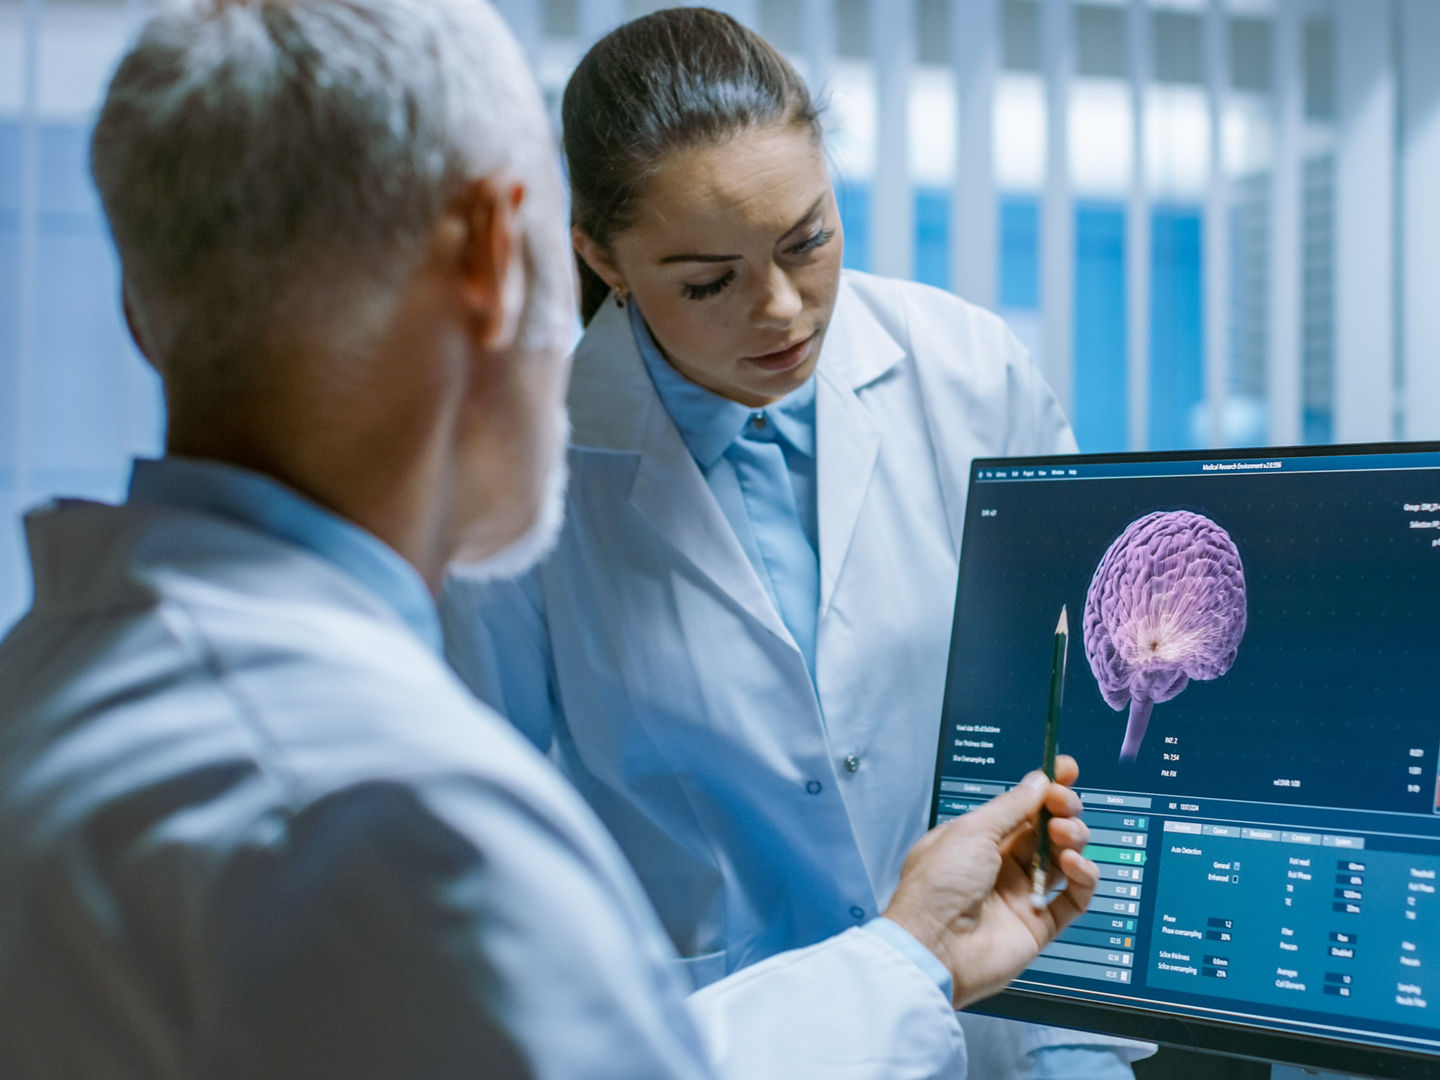 Two Medical Scientists in the Brain Research Laboratory Discussing Progress on the Neurophysiology Project Fighting Tumors. Neuroscientists Use Personal Computer with MRI, CT Scans Show Brain Images.